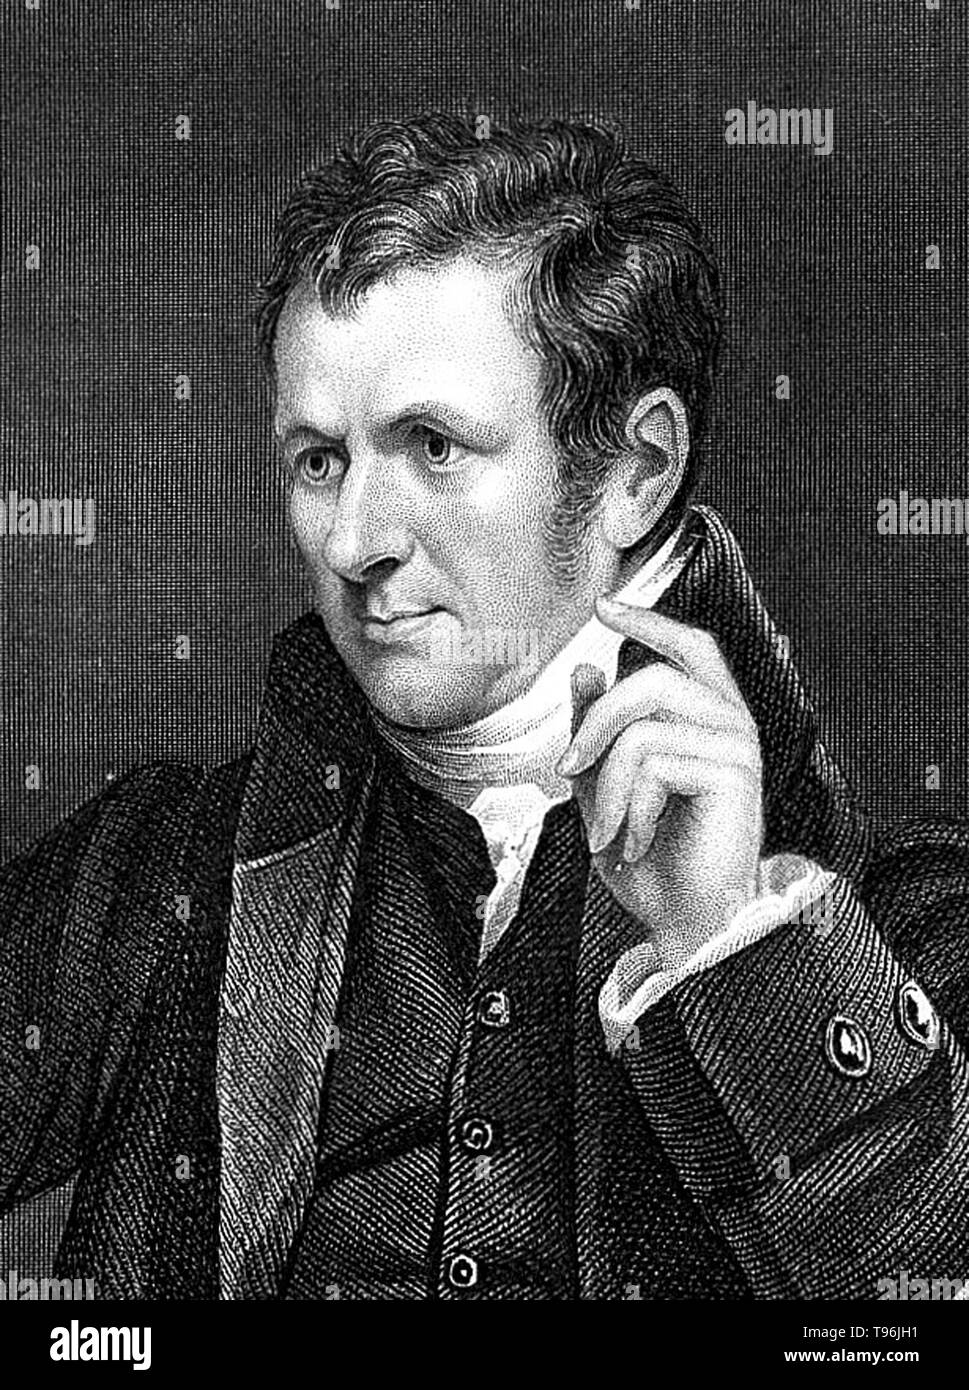 Sir Humphry Davy, 1st Baronet (December  17, 1778 - May 29, 1829) was a Cornish chemist and inventor, best remembered today for isolating, using electricity, a series of elements for the first time: potassium and sodium in 1807 and calcium, strontium, barium, magnesium and boron the following year, as well as discovering the elemental nature of chlorine and iodine. He also studied the forces involved in these separations, inventing the new field of electrochemistry. Stock Photo